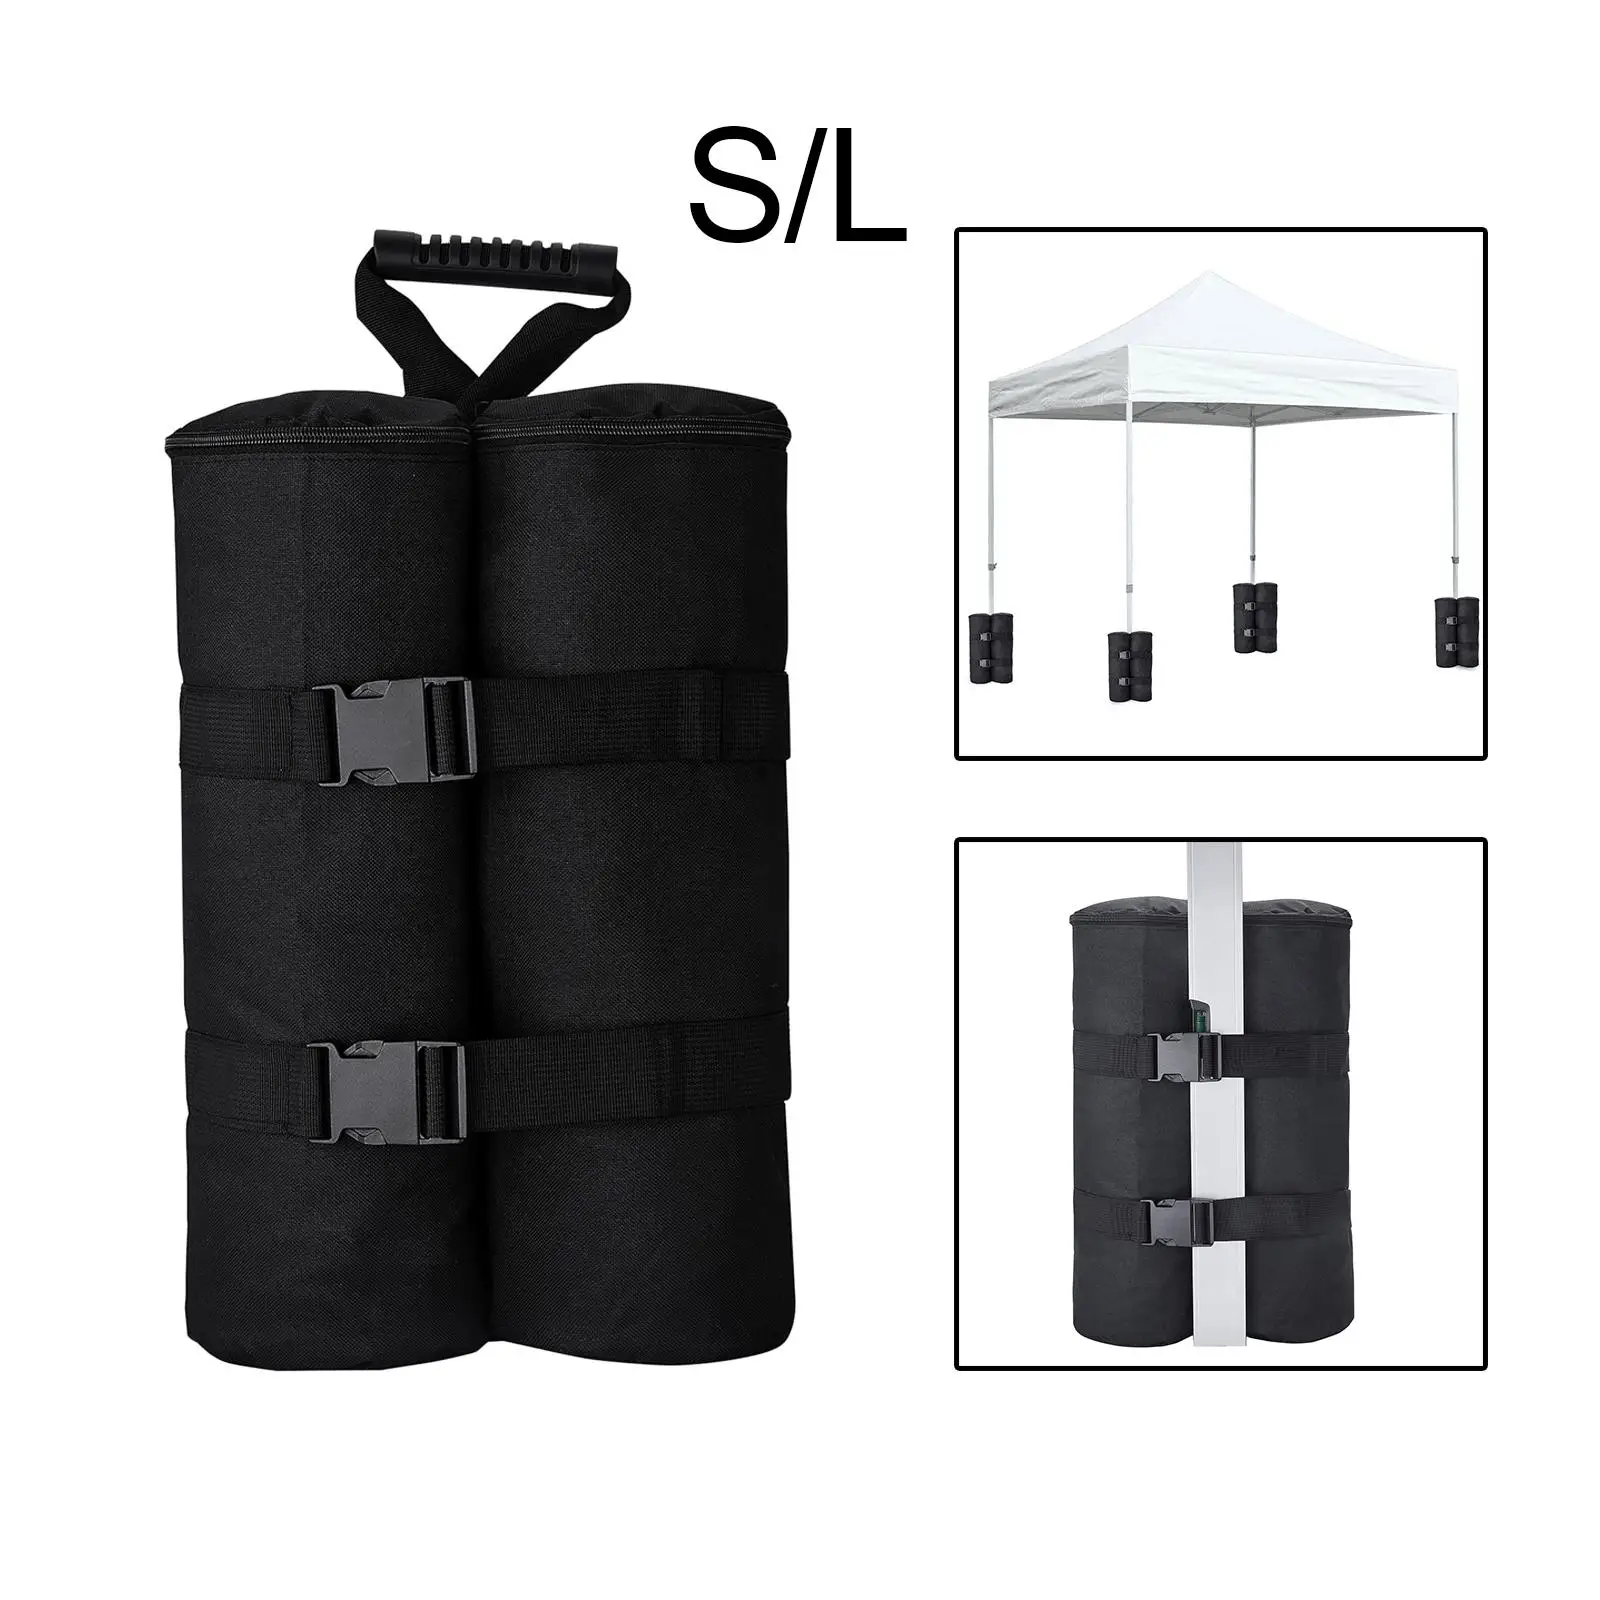 Large Weight Bags for Awning, Awning Weights Sandbag for Tent Patio Umbrella